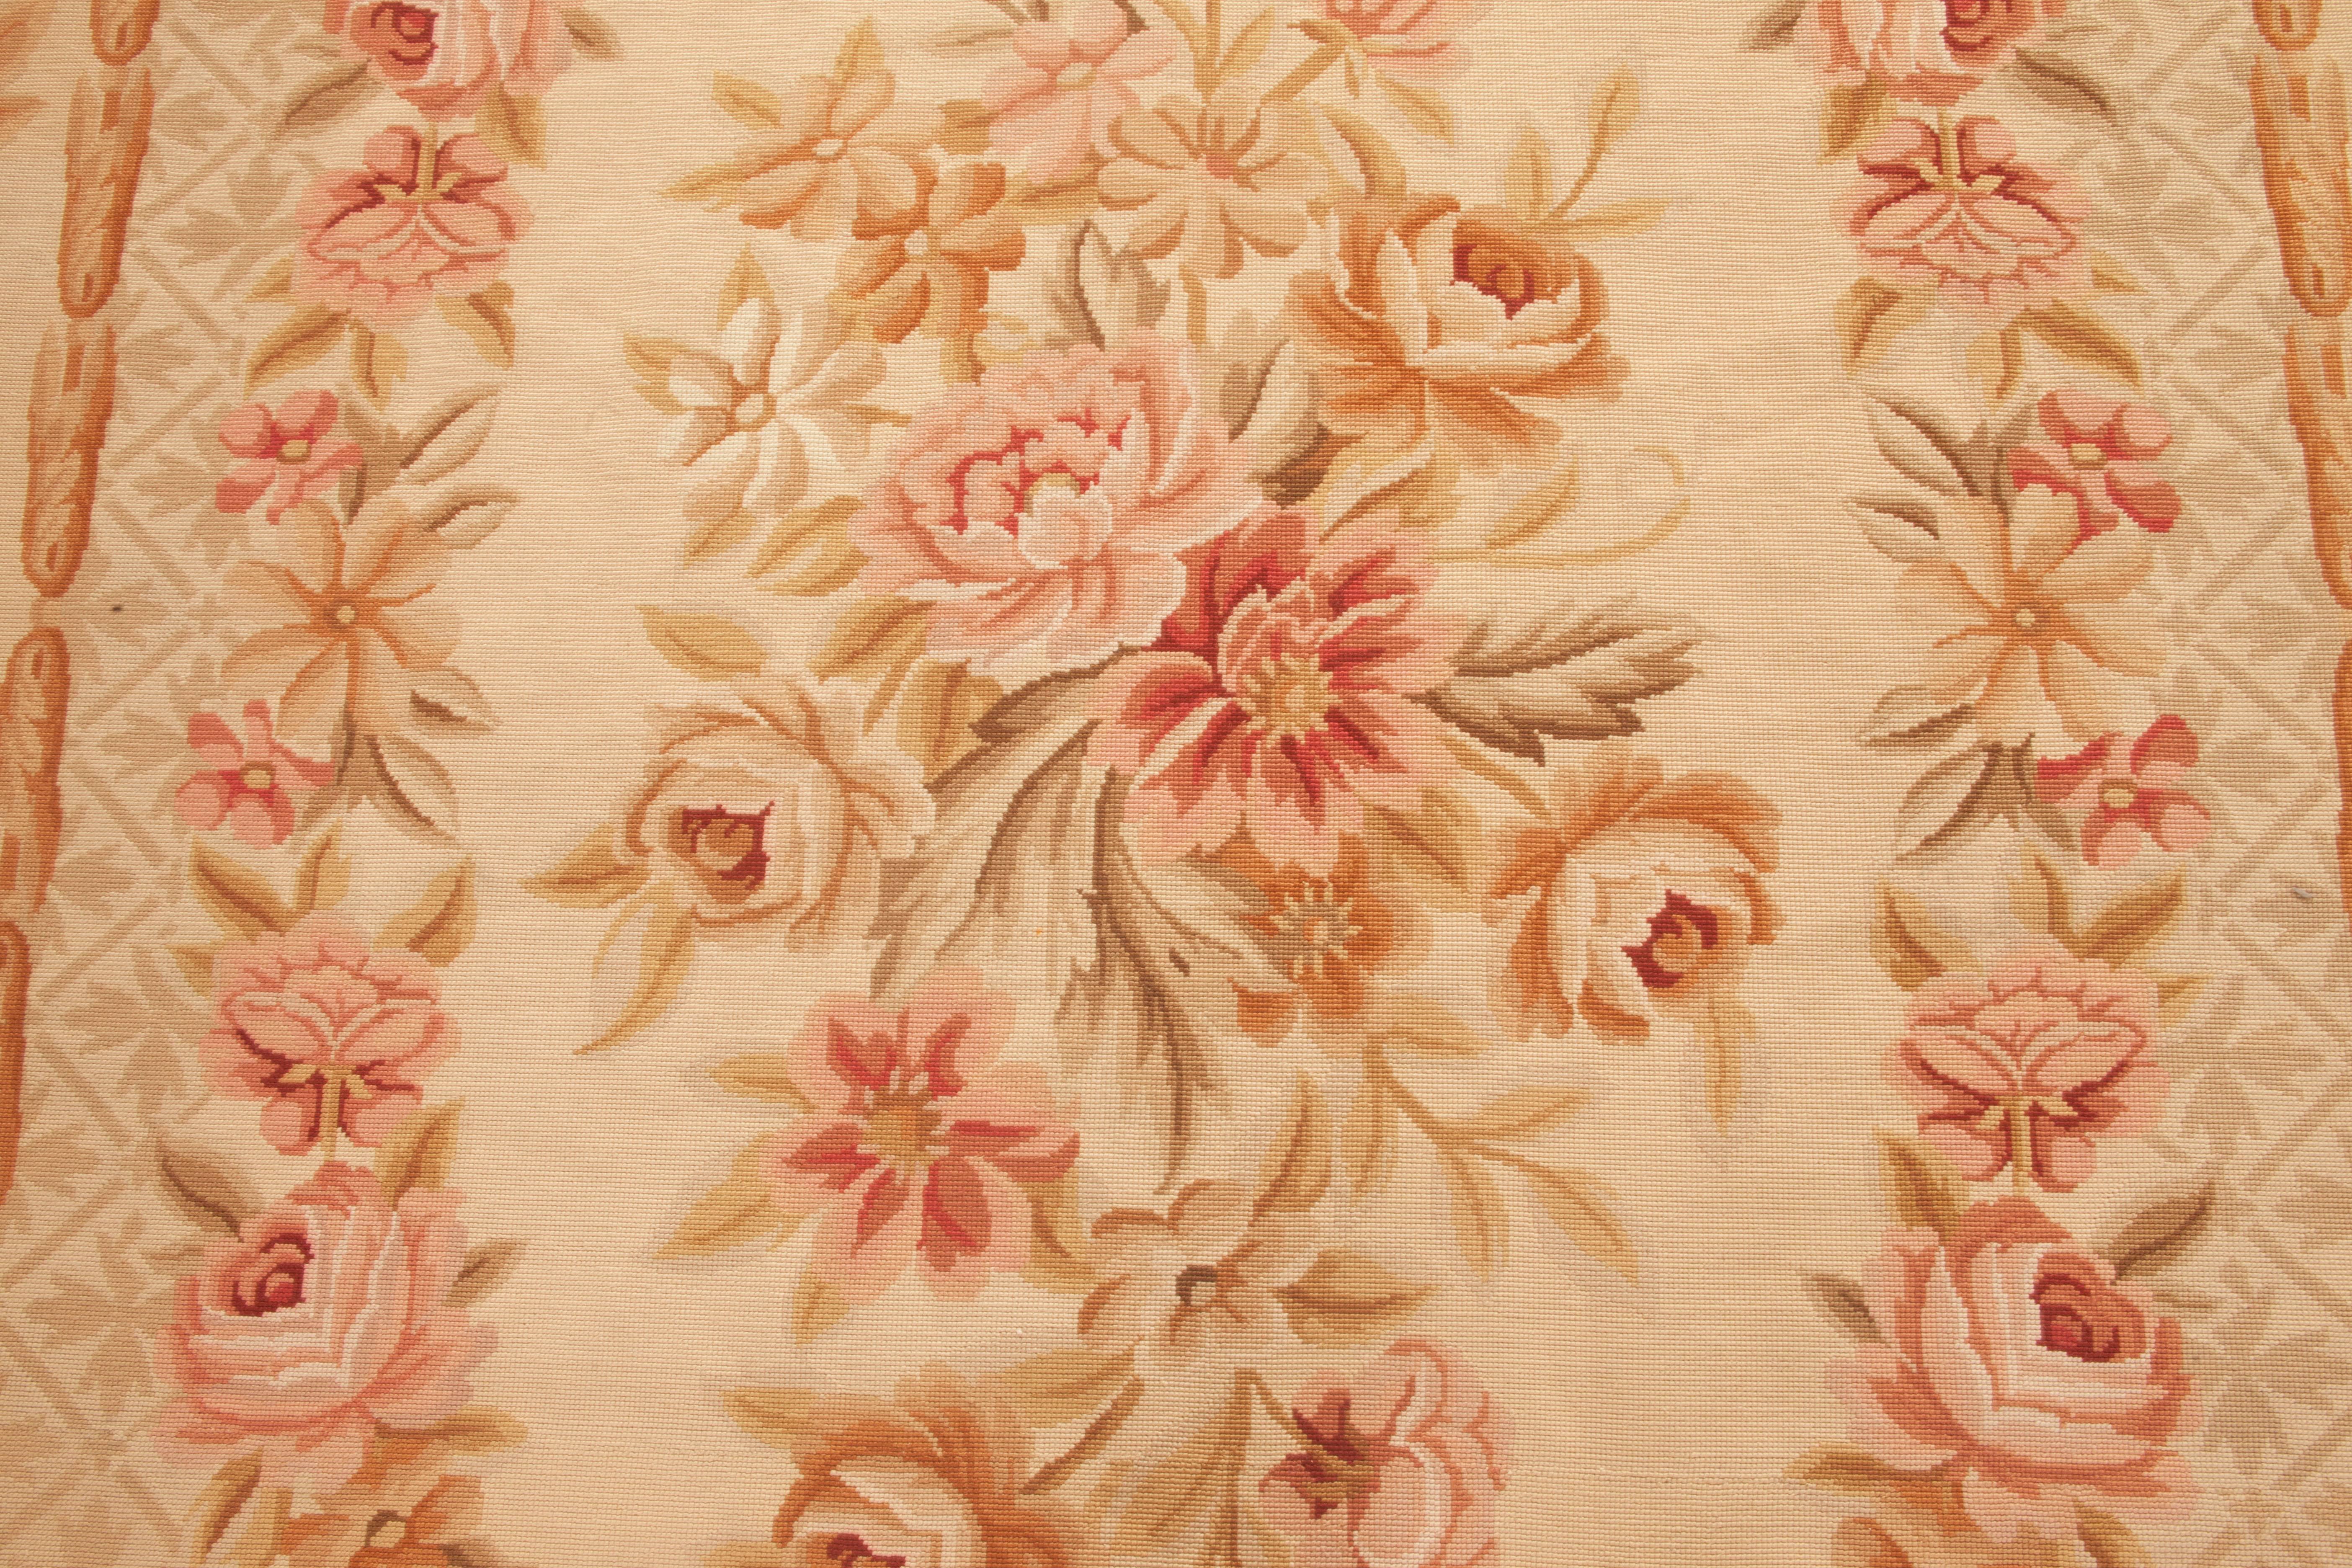 An exquisite example of a revival of an 18th century design, the rug exhibits a floral oval medallion with four corner bouquets on a golden cream field with a latticework of acanthus surrounded by tendrils of ivy and flowers. Olive, gold, rust,